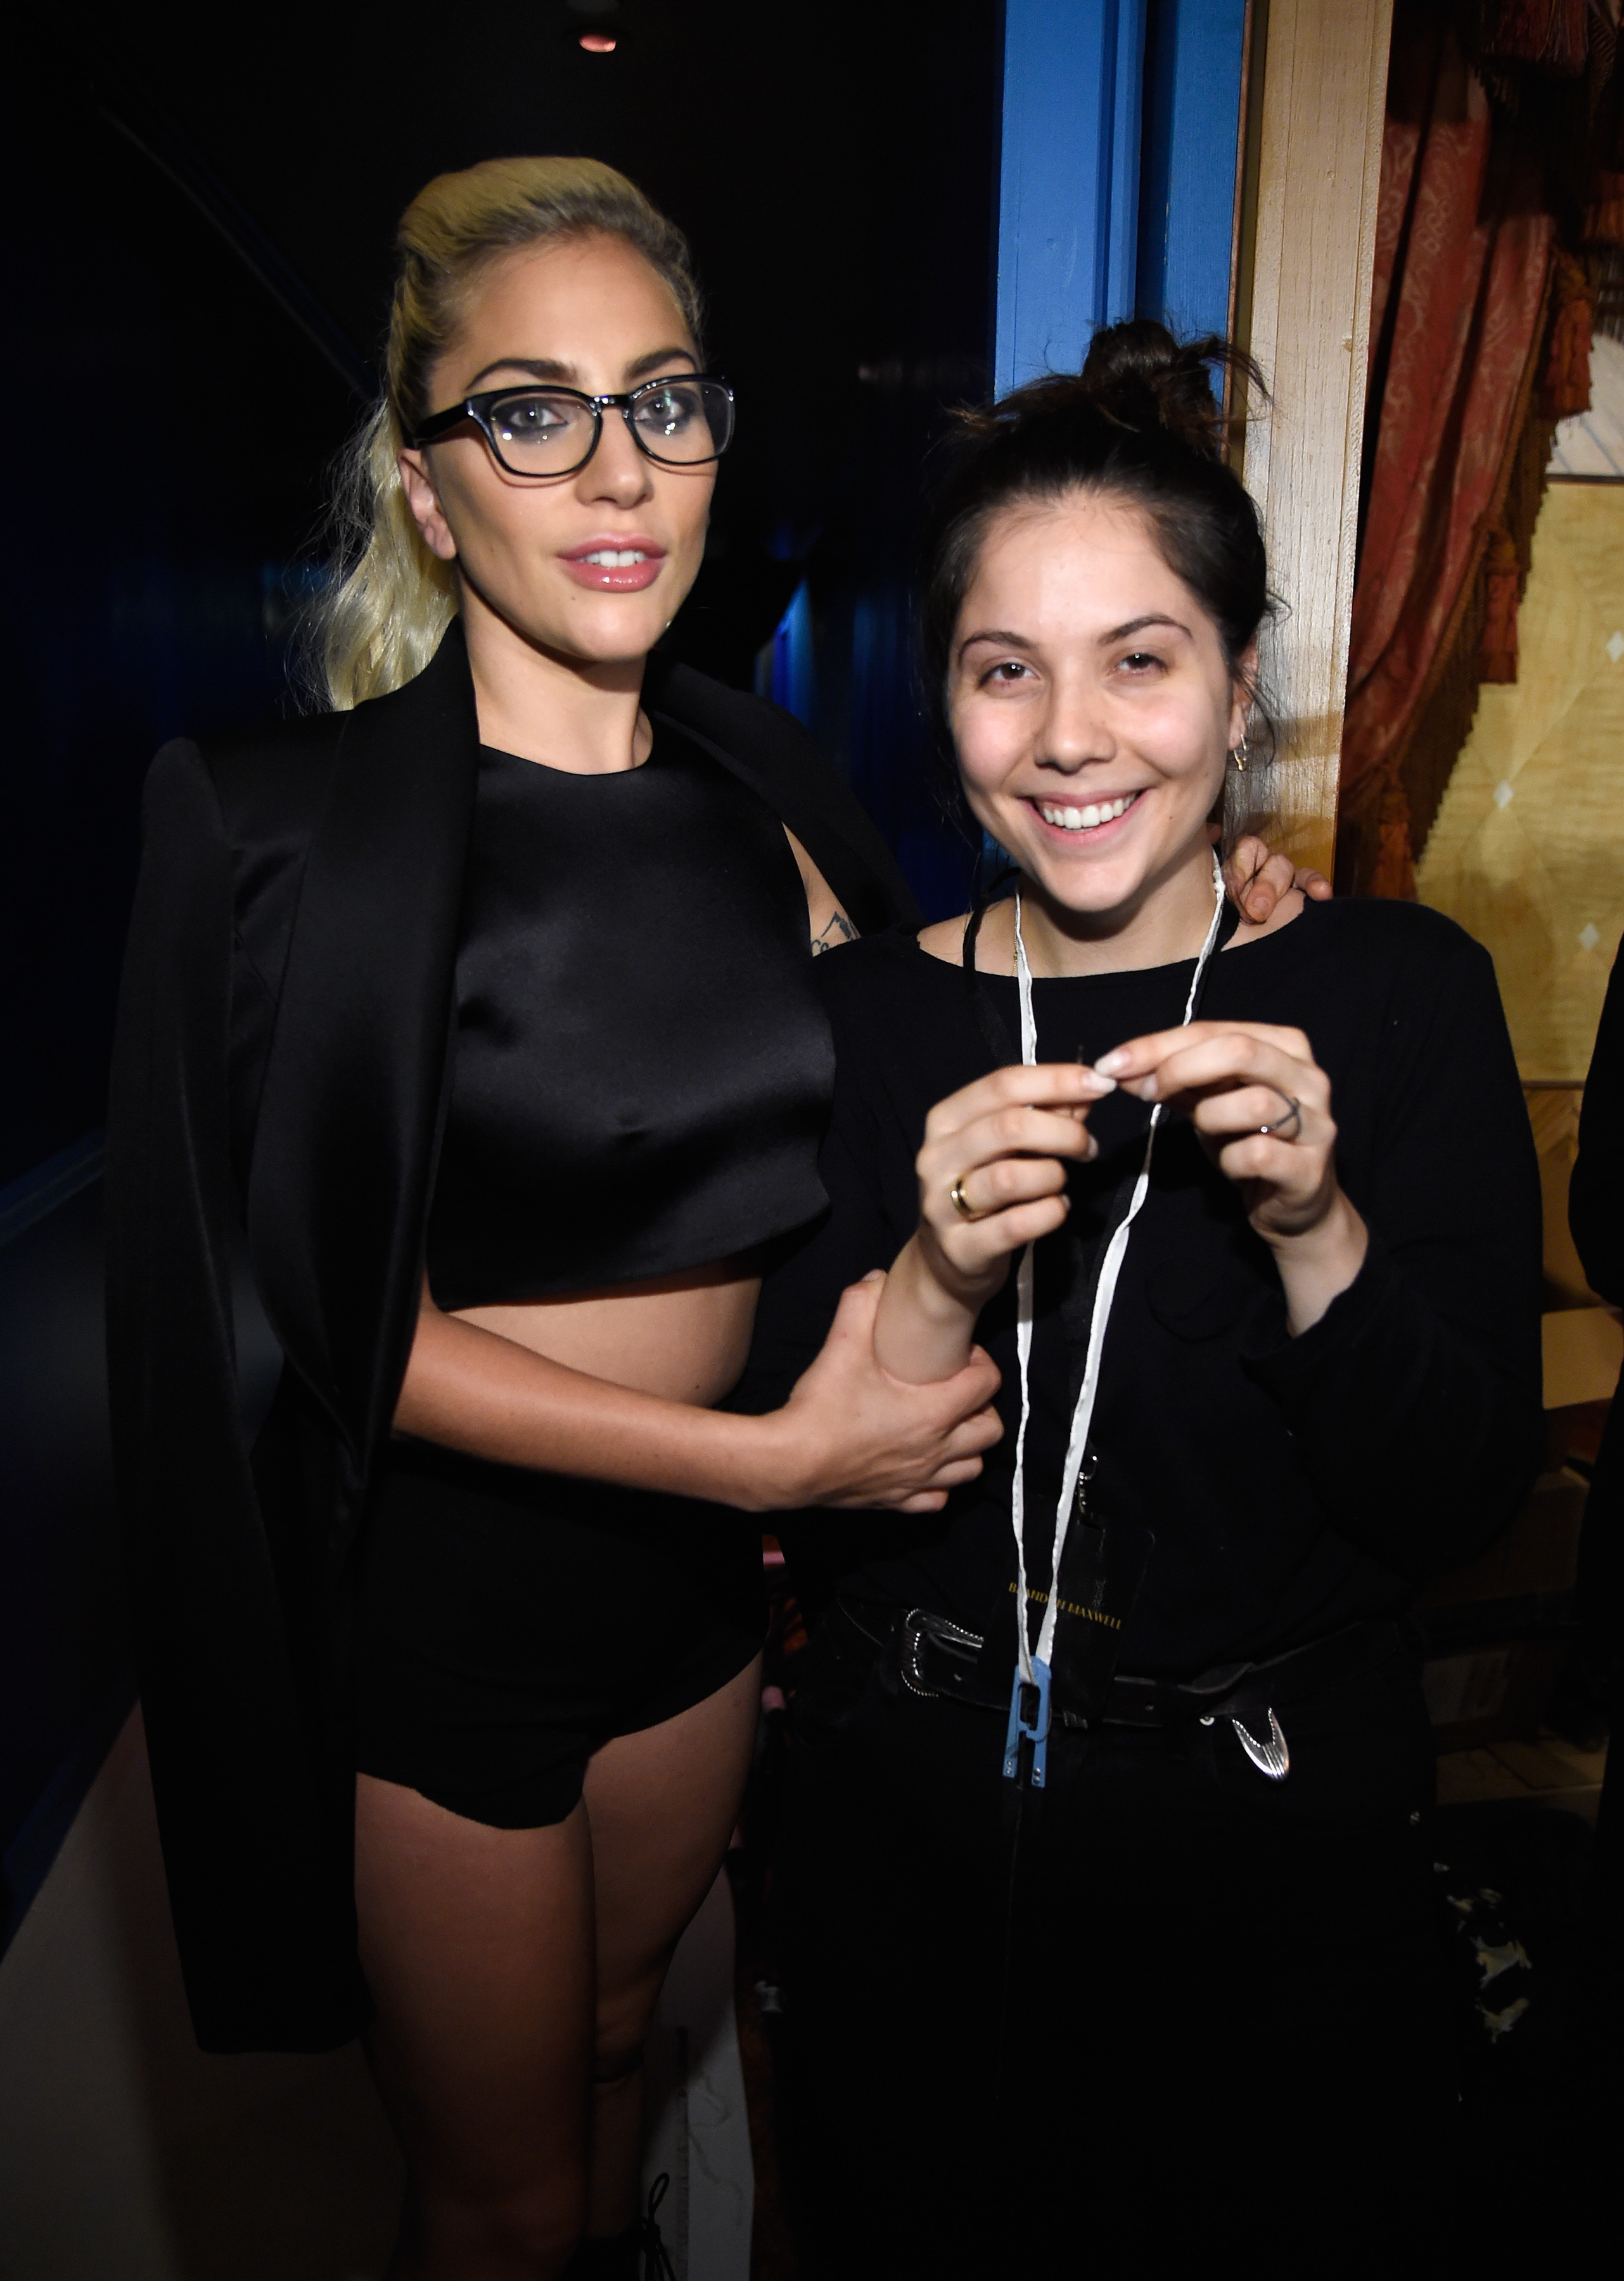 The pair worked together on Gaga's movie, A Star Is Born